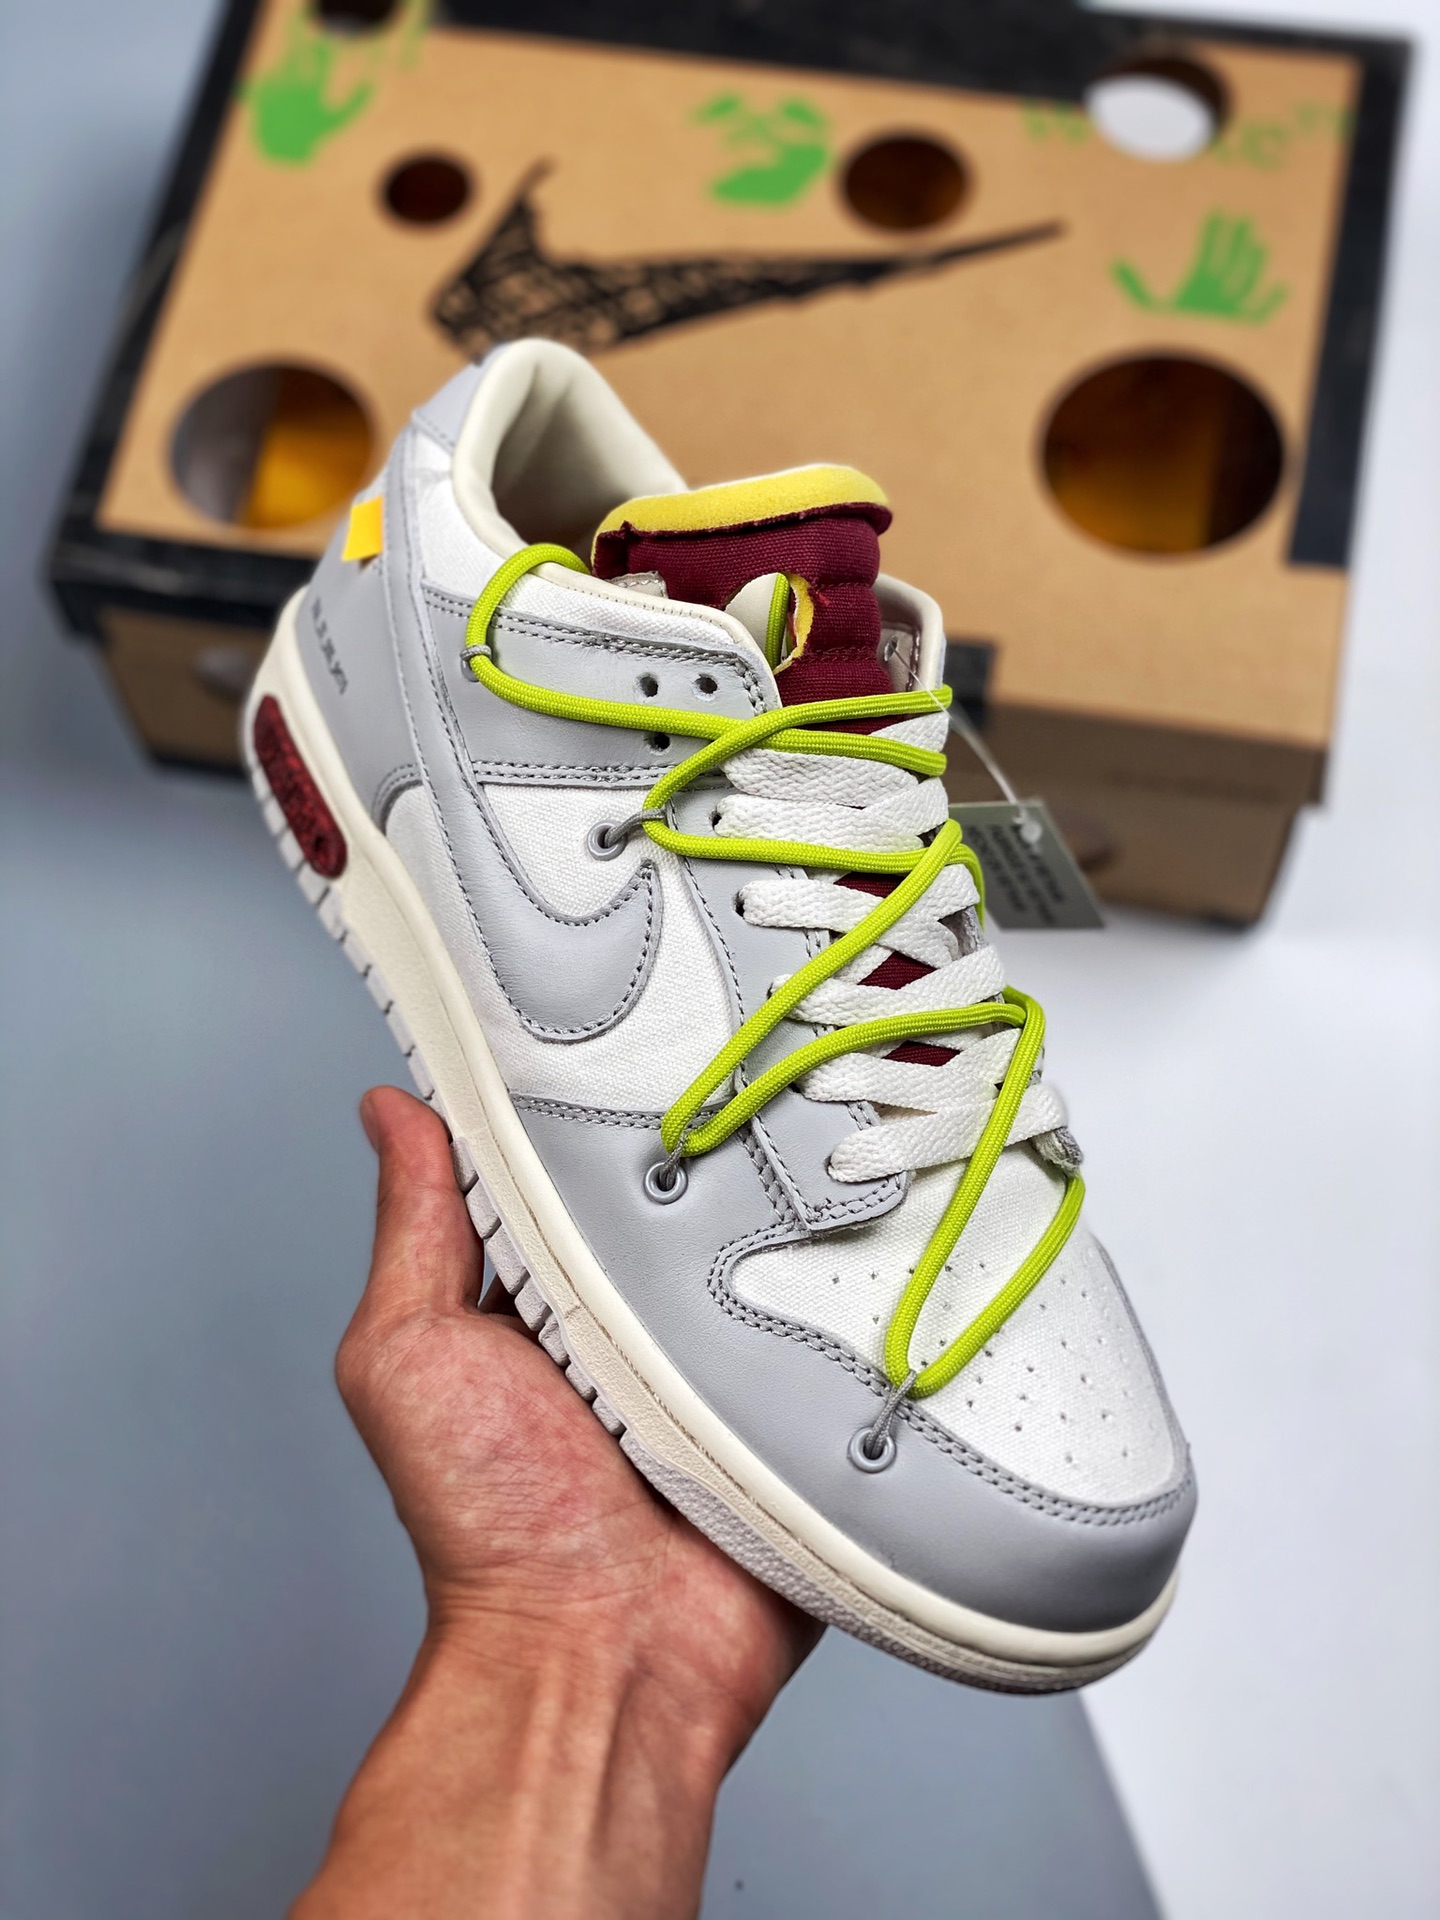 Off-White x Nike Dunk Low "08 of 50" Sail Grey Shoes